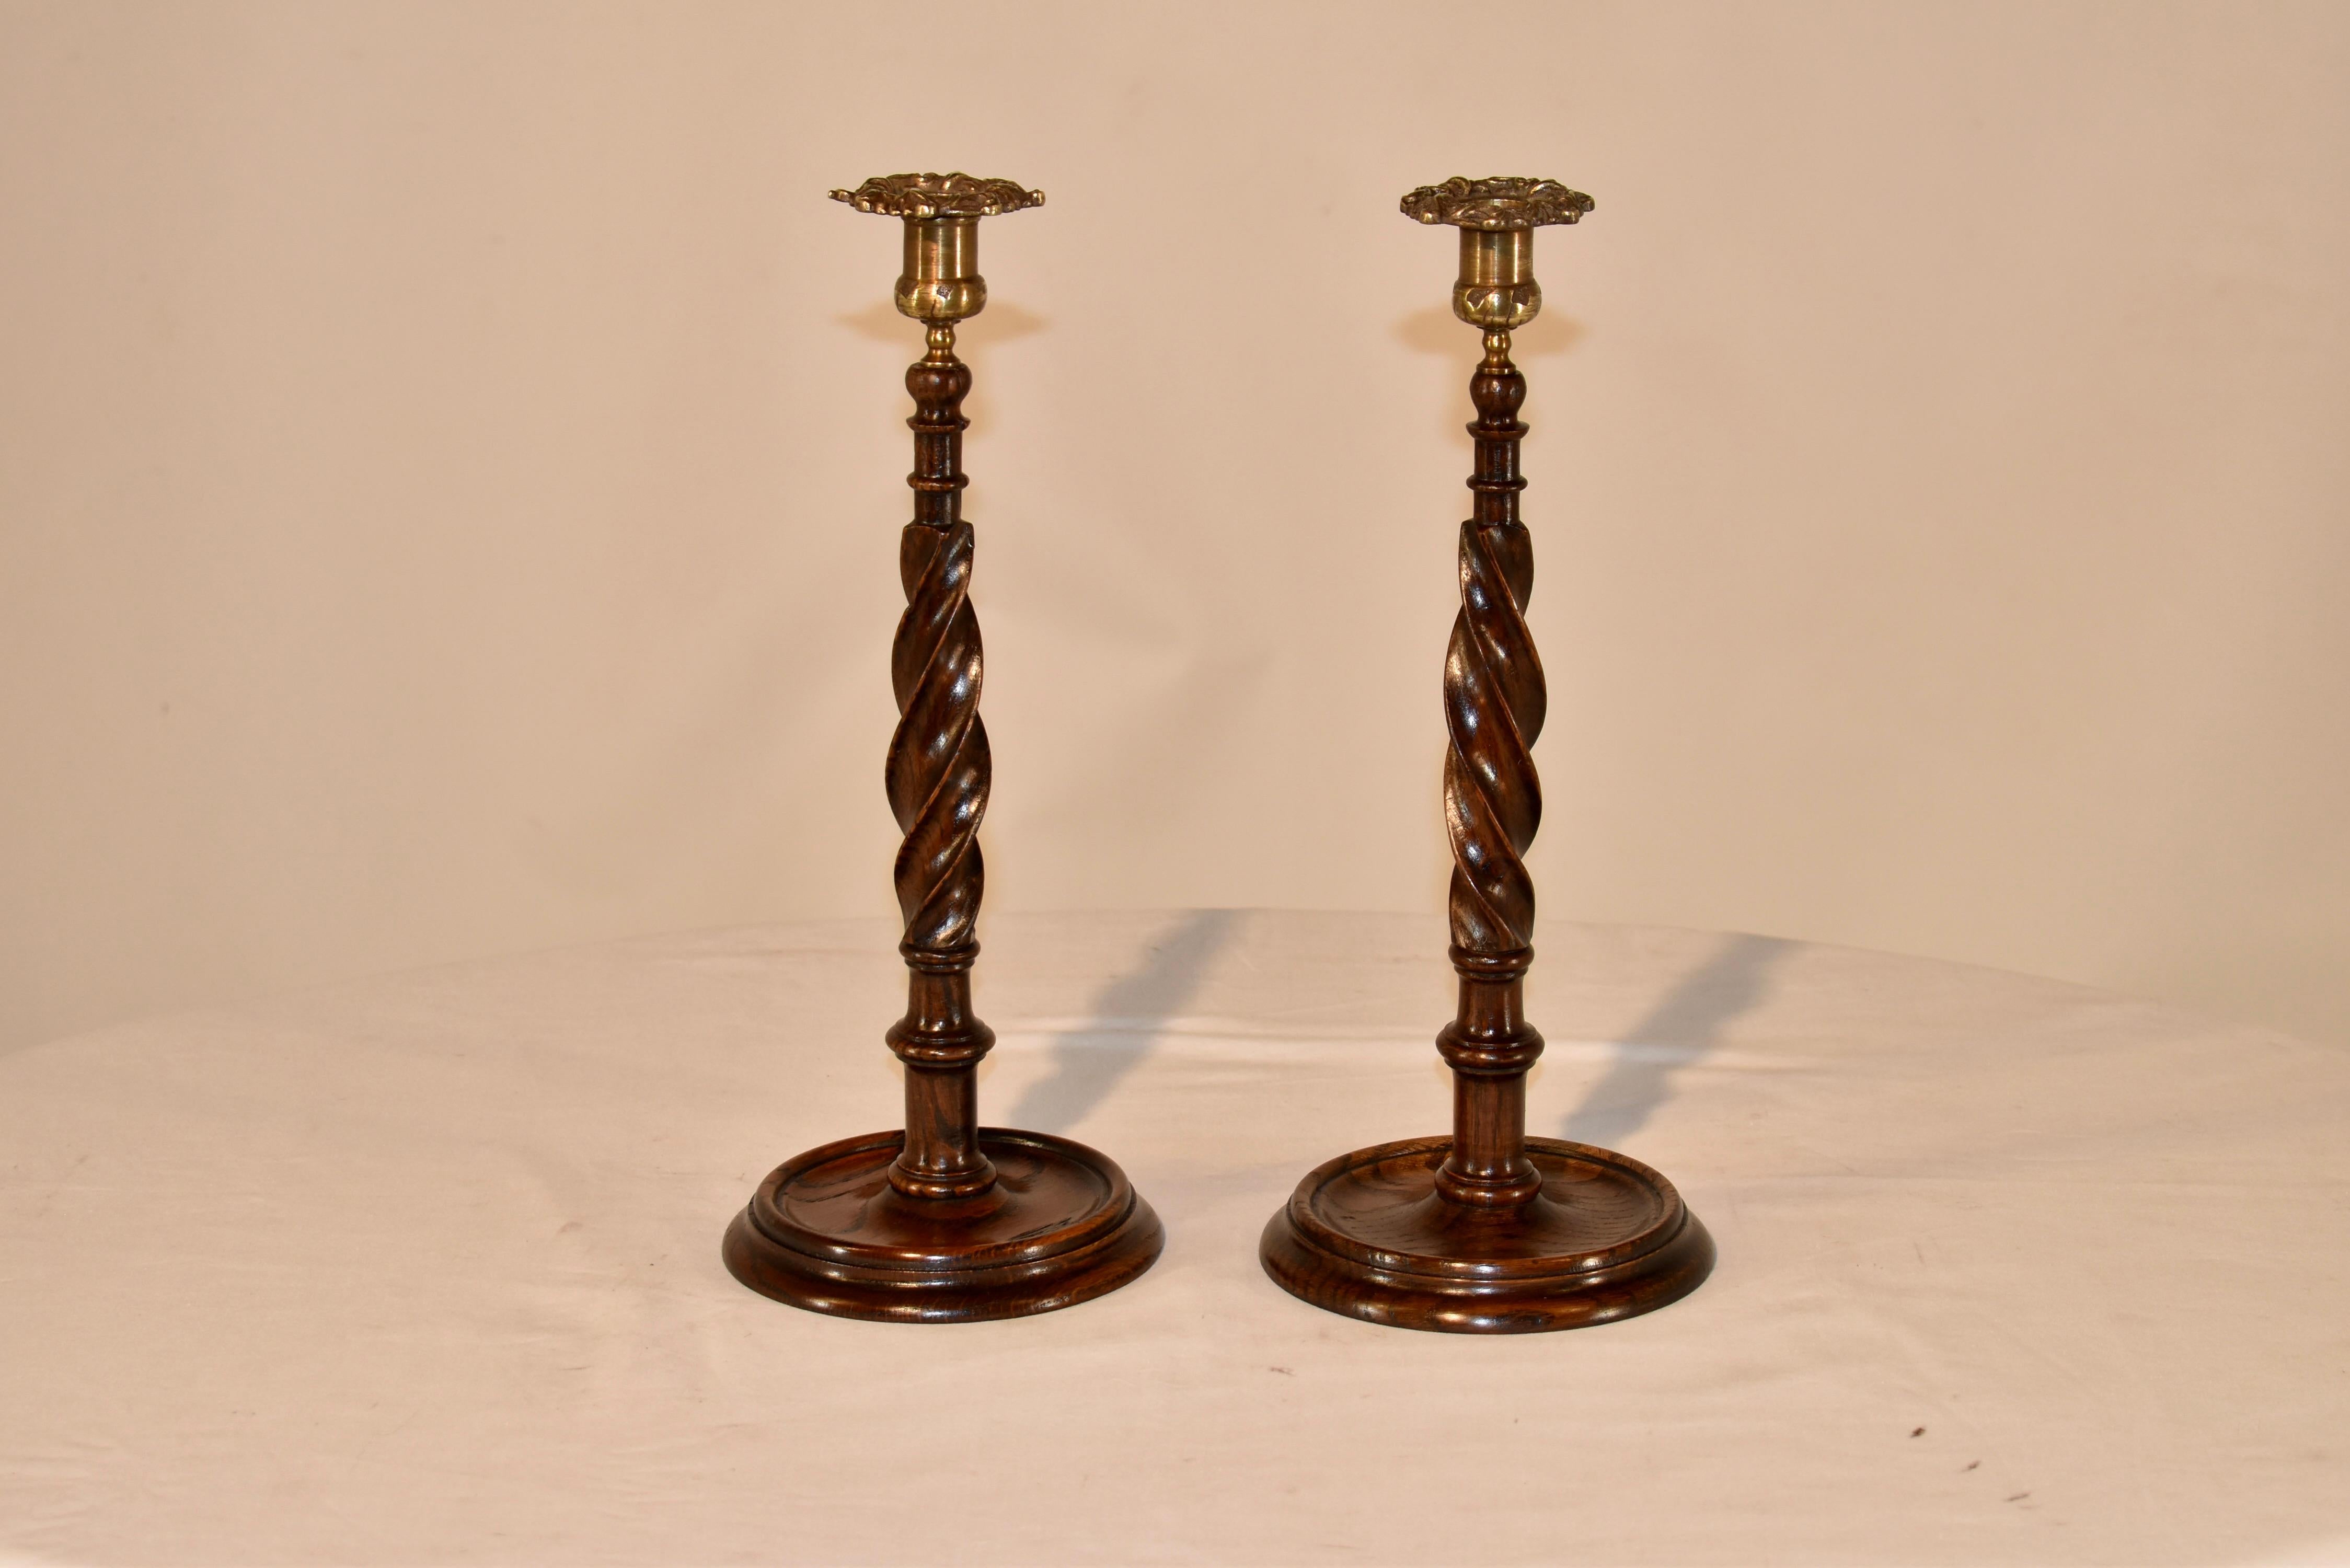 Pair of 19th century oak candlesticks from England. The candle cups are beautifully hand cast from brass and are reminiscent of florals, perched on top of hand turned ribbon twist stems. The edges are so sharp and crisp, they are delightful in